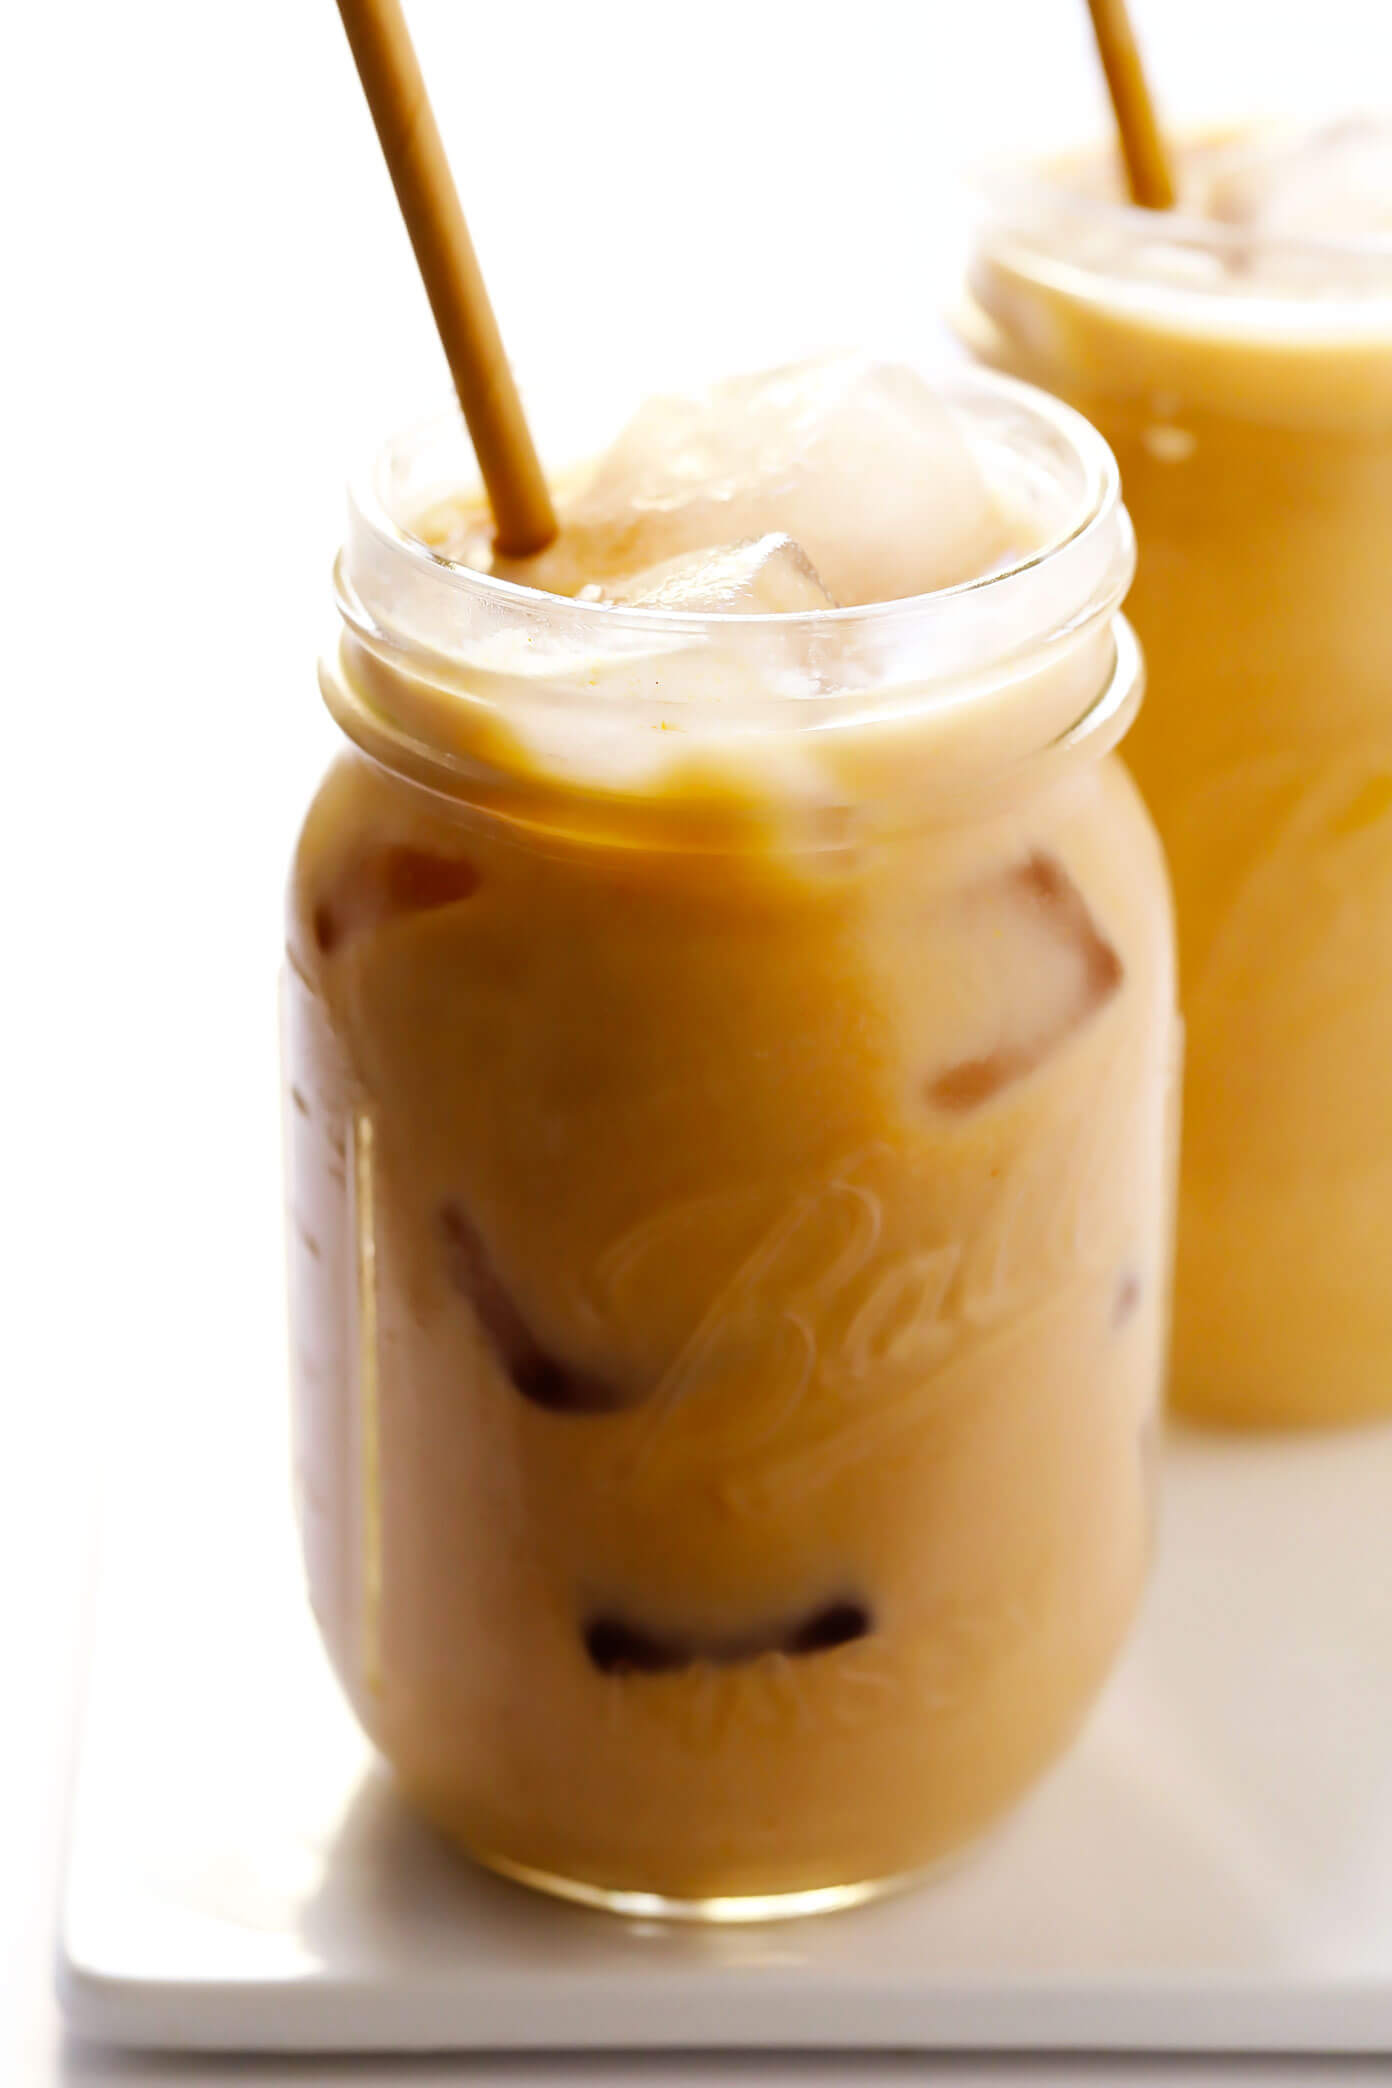 Iced Pumpkin Spice Lattes without Whipped Cream